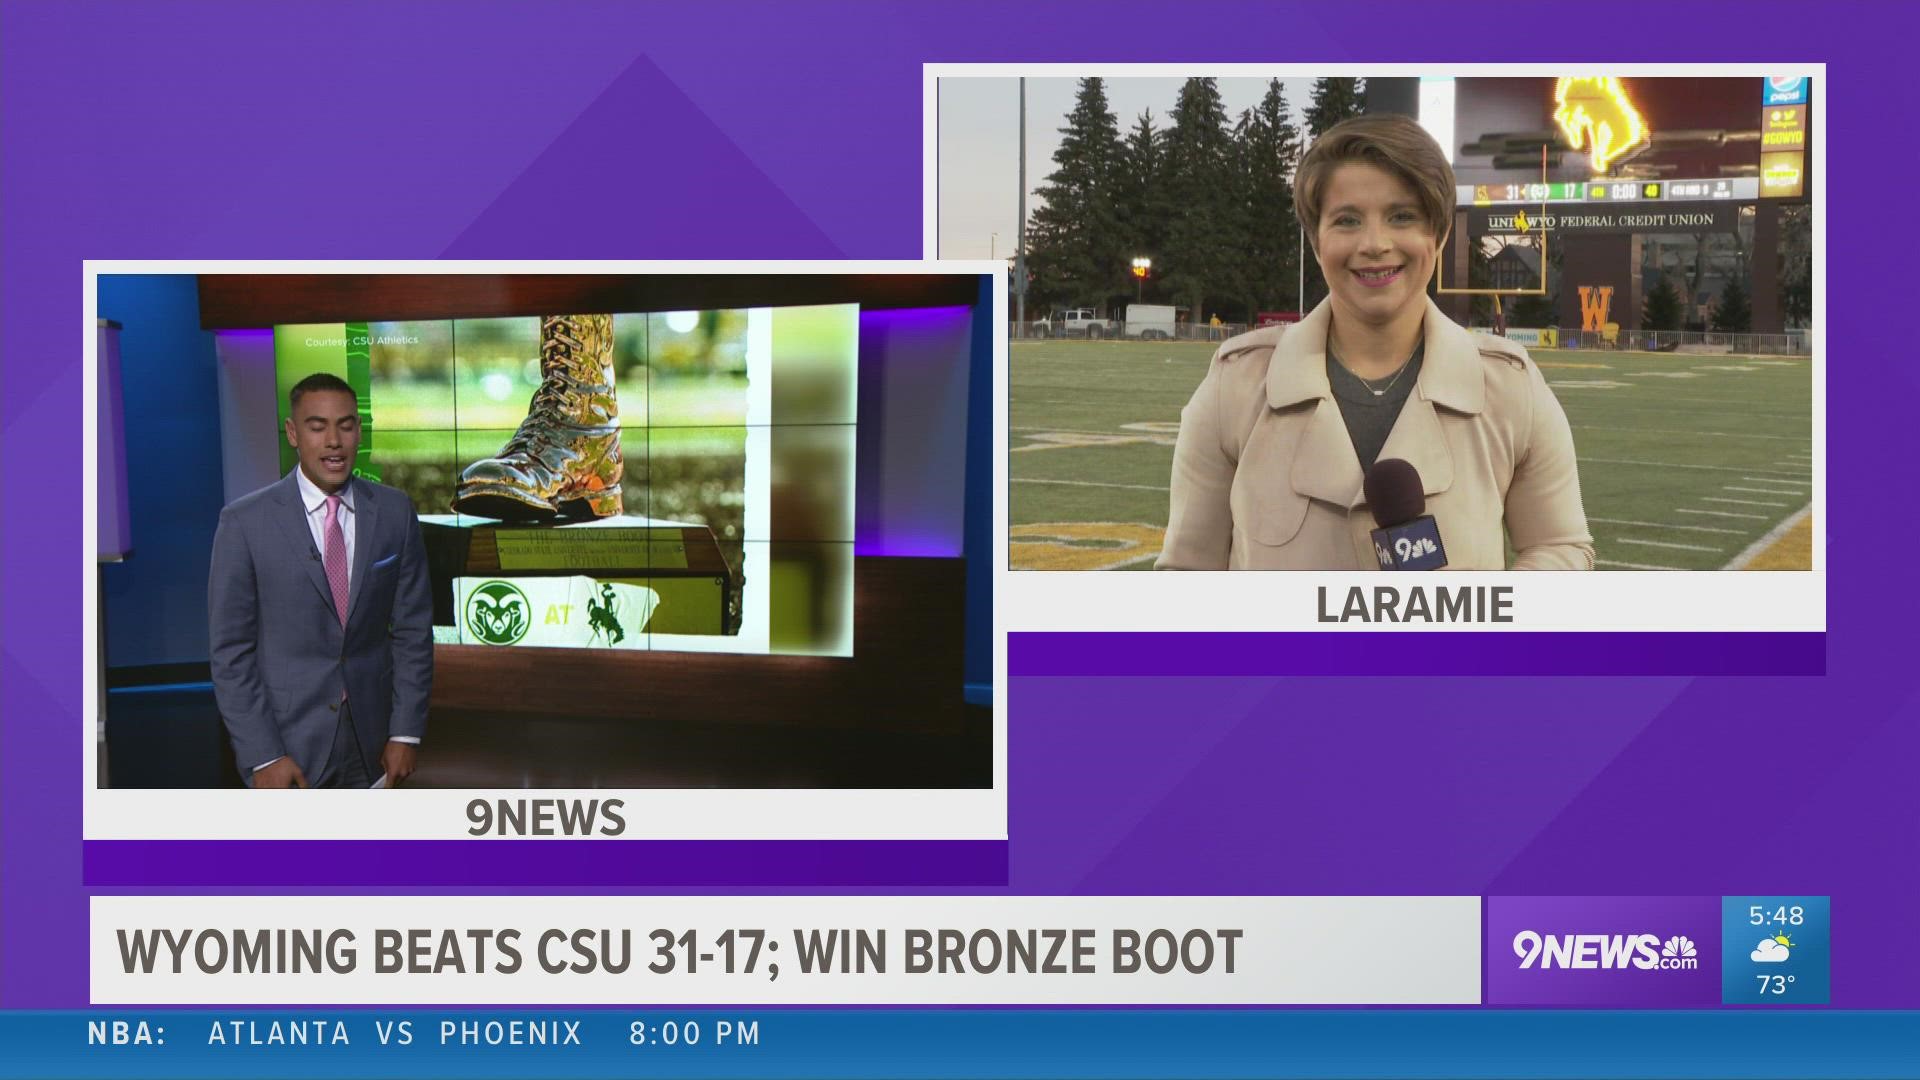 9NEWS sports reporter Arielle Orsuto was live in Laramie after the Cowboys beat the Rams 31-17 on Saturday to win the Border War and take home the Bronze Boot.